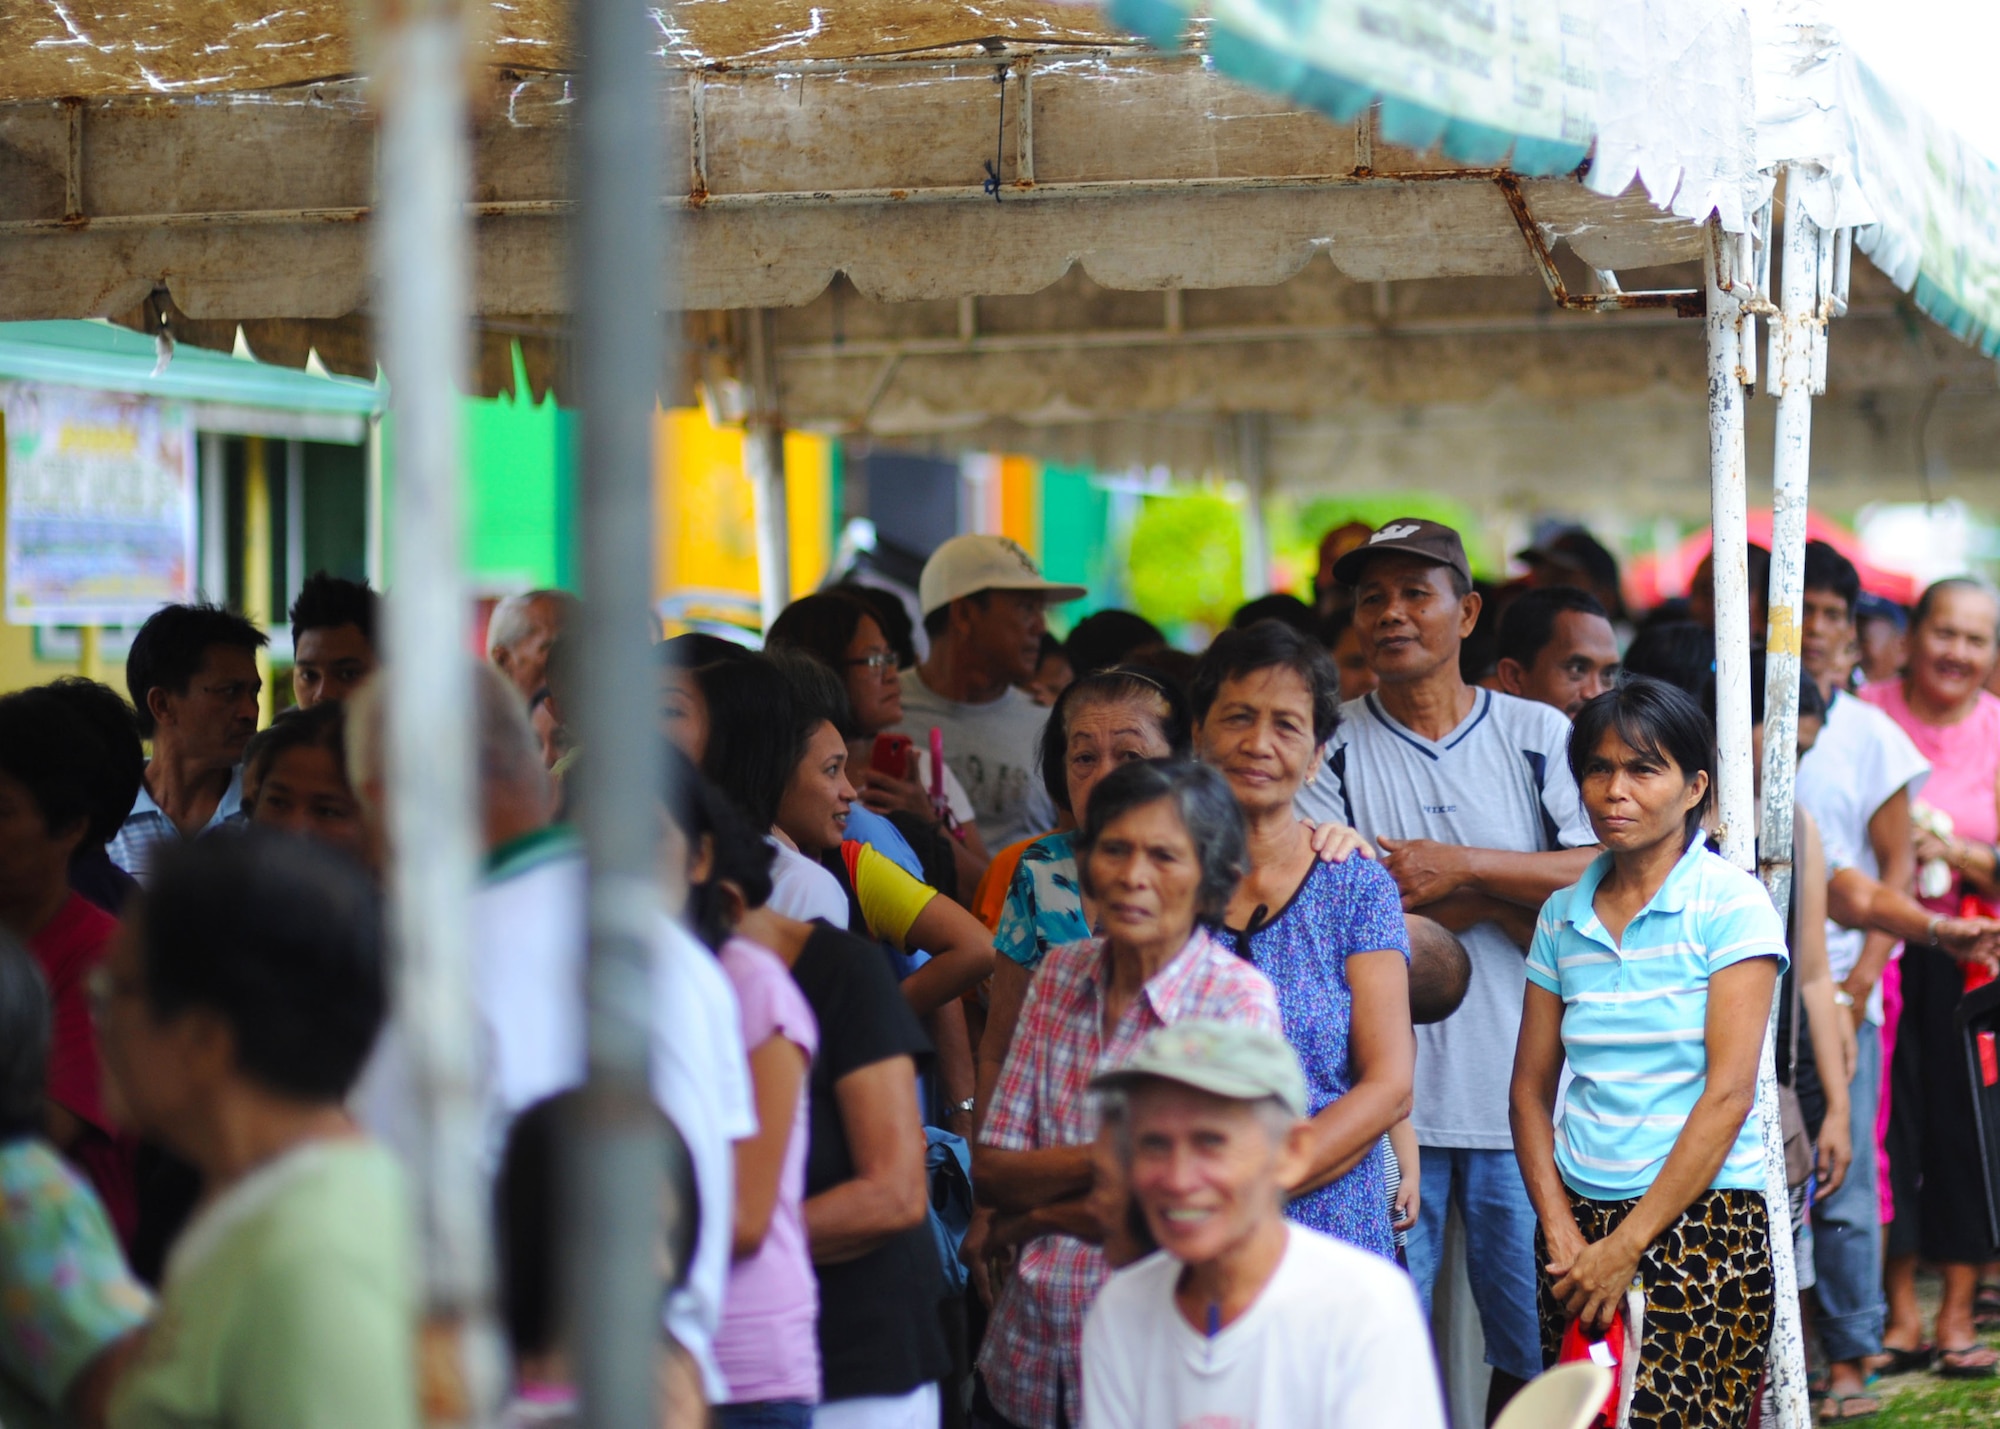 Citizens of Bohol province, Philippines, await their chance to see military doctors, dentists, optometrists, physical therapists and pharmacists from the U.S. Air Force, U.S. Army, U.S. Marine Corps and U.S. Navy along with service members from the Philippines, Australia, Indonesia, Timor-Leste and Papua New Guinea all supporting Pacific Angel Philippines in Lila, Bohol province, Philippines, Aug. 16, 2015. Pacific Angel is a multilateral humanitarian assistance civil military operation, which improves military-to-military partnerships in the Pacific while also providing medical health outreach, civic engineering projects and subject matter exchanges among partner forces. (U.S. Air Force photo by Tech. Sgt. Aaron Oelrich/Released)